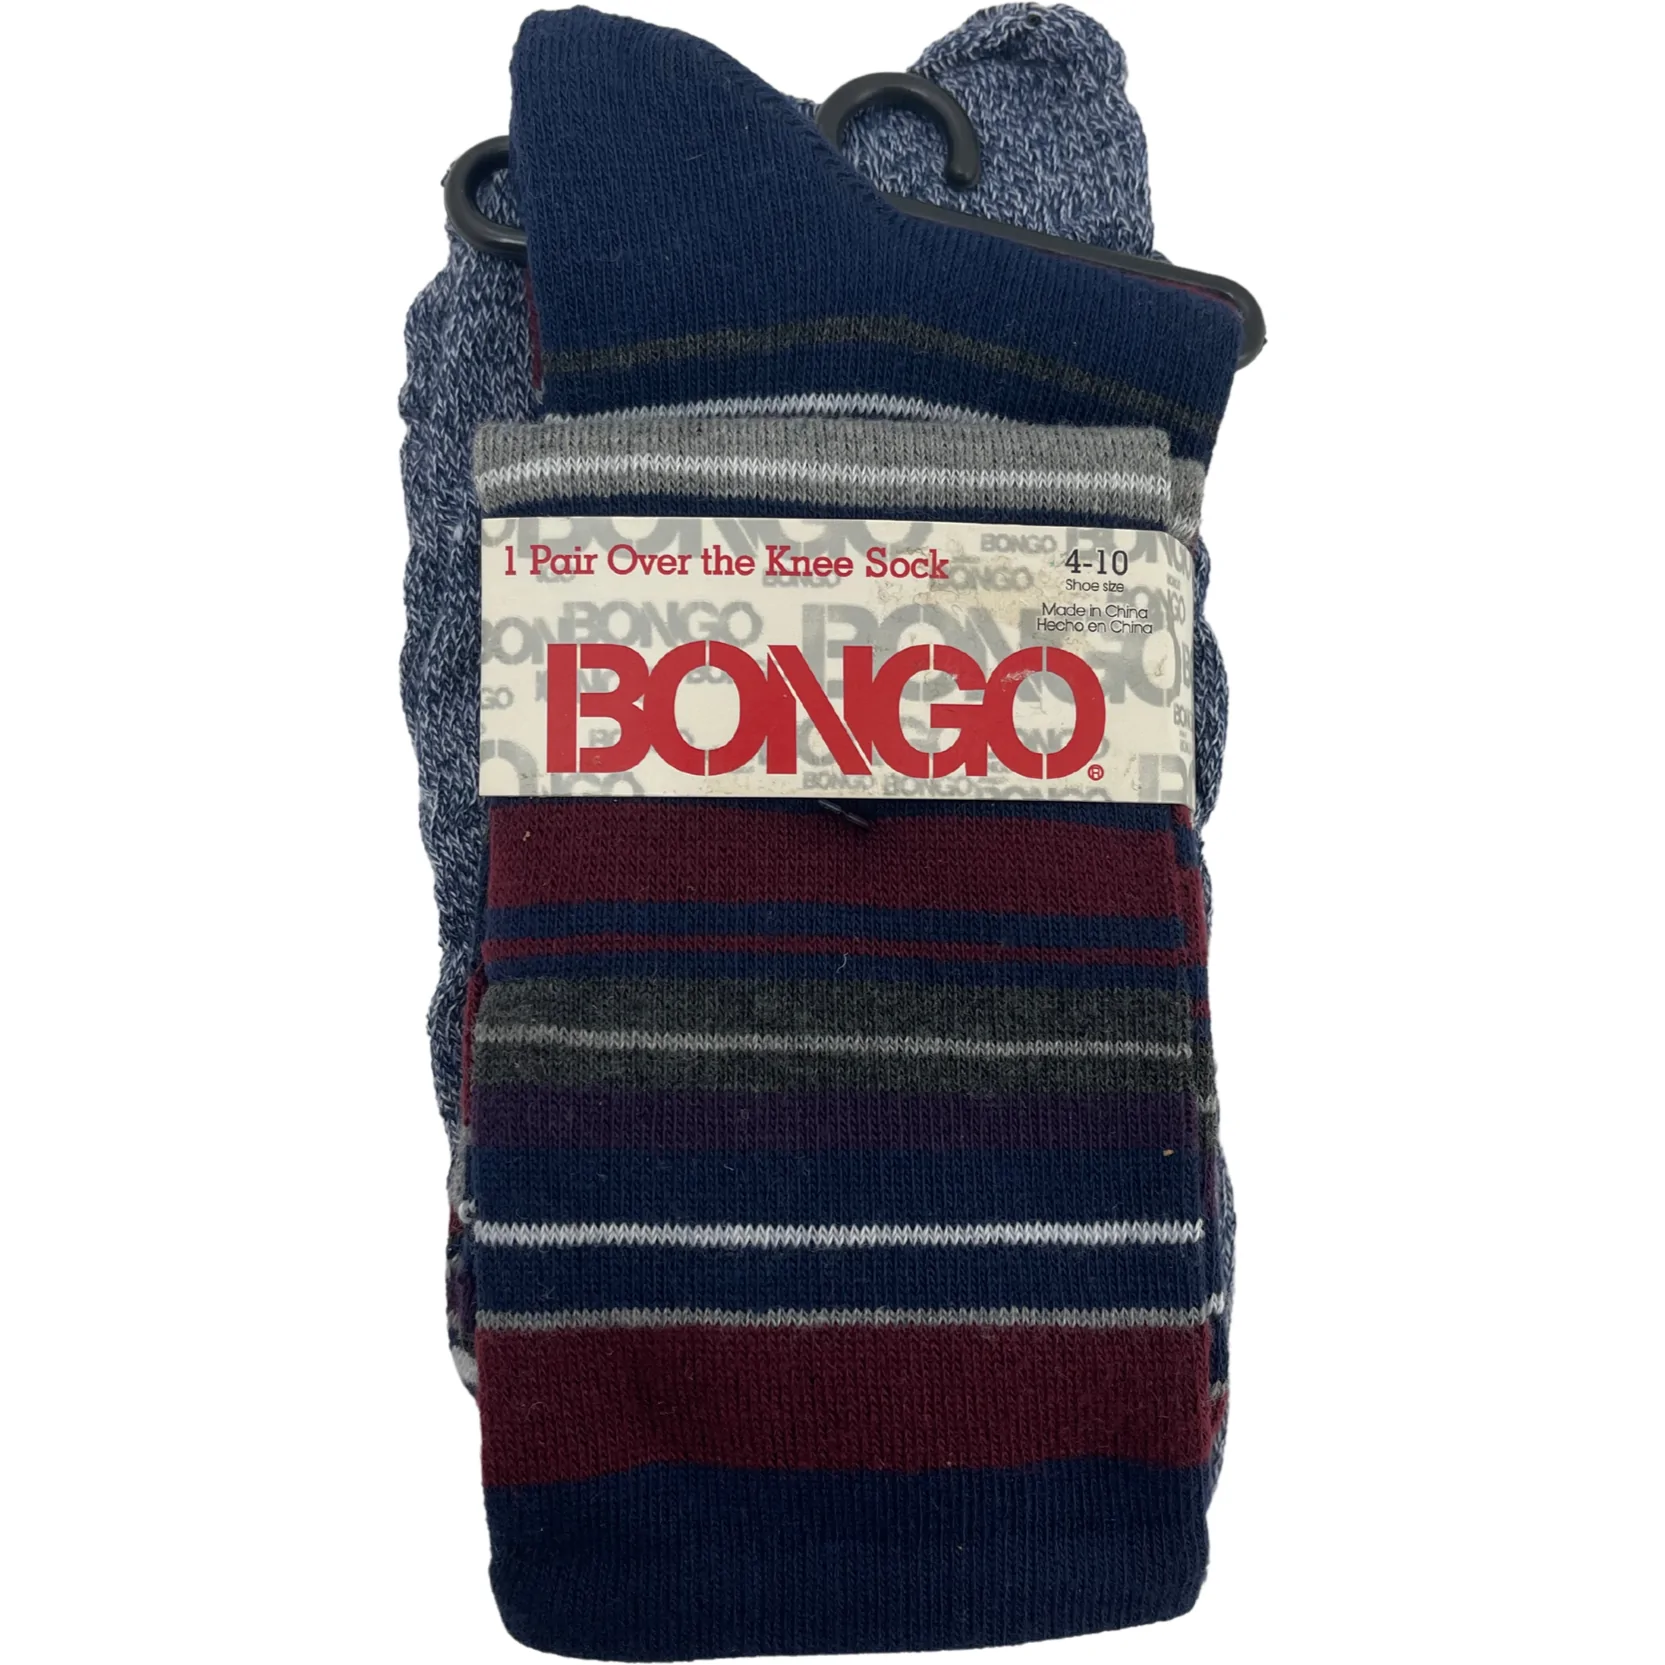 Bongo Women's Over The Knee Socks / 1 Pair / Blue and Red / Shoe Size 4-10